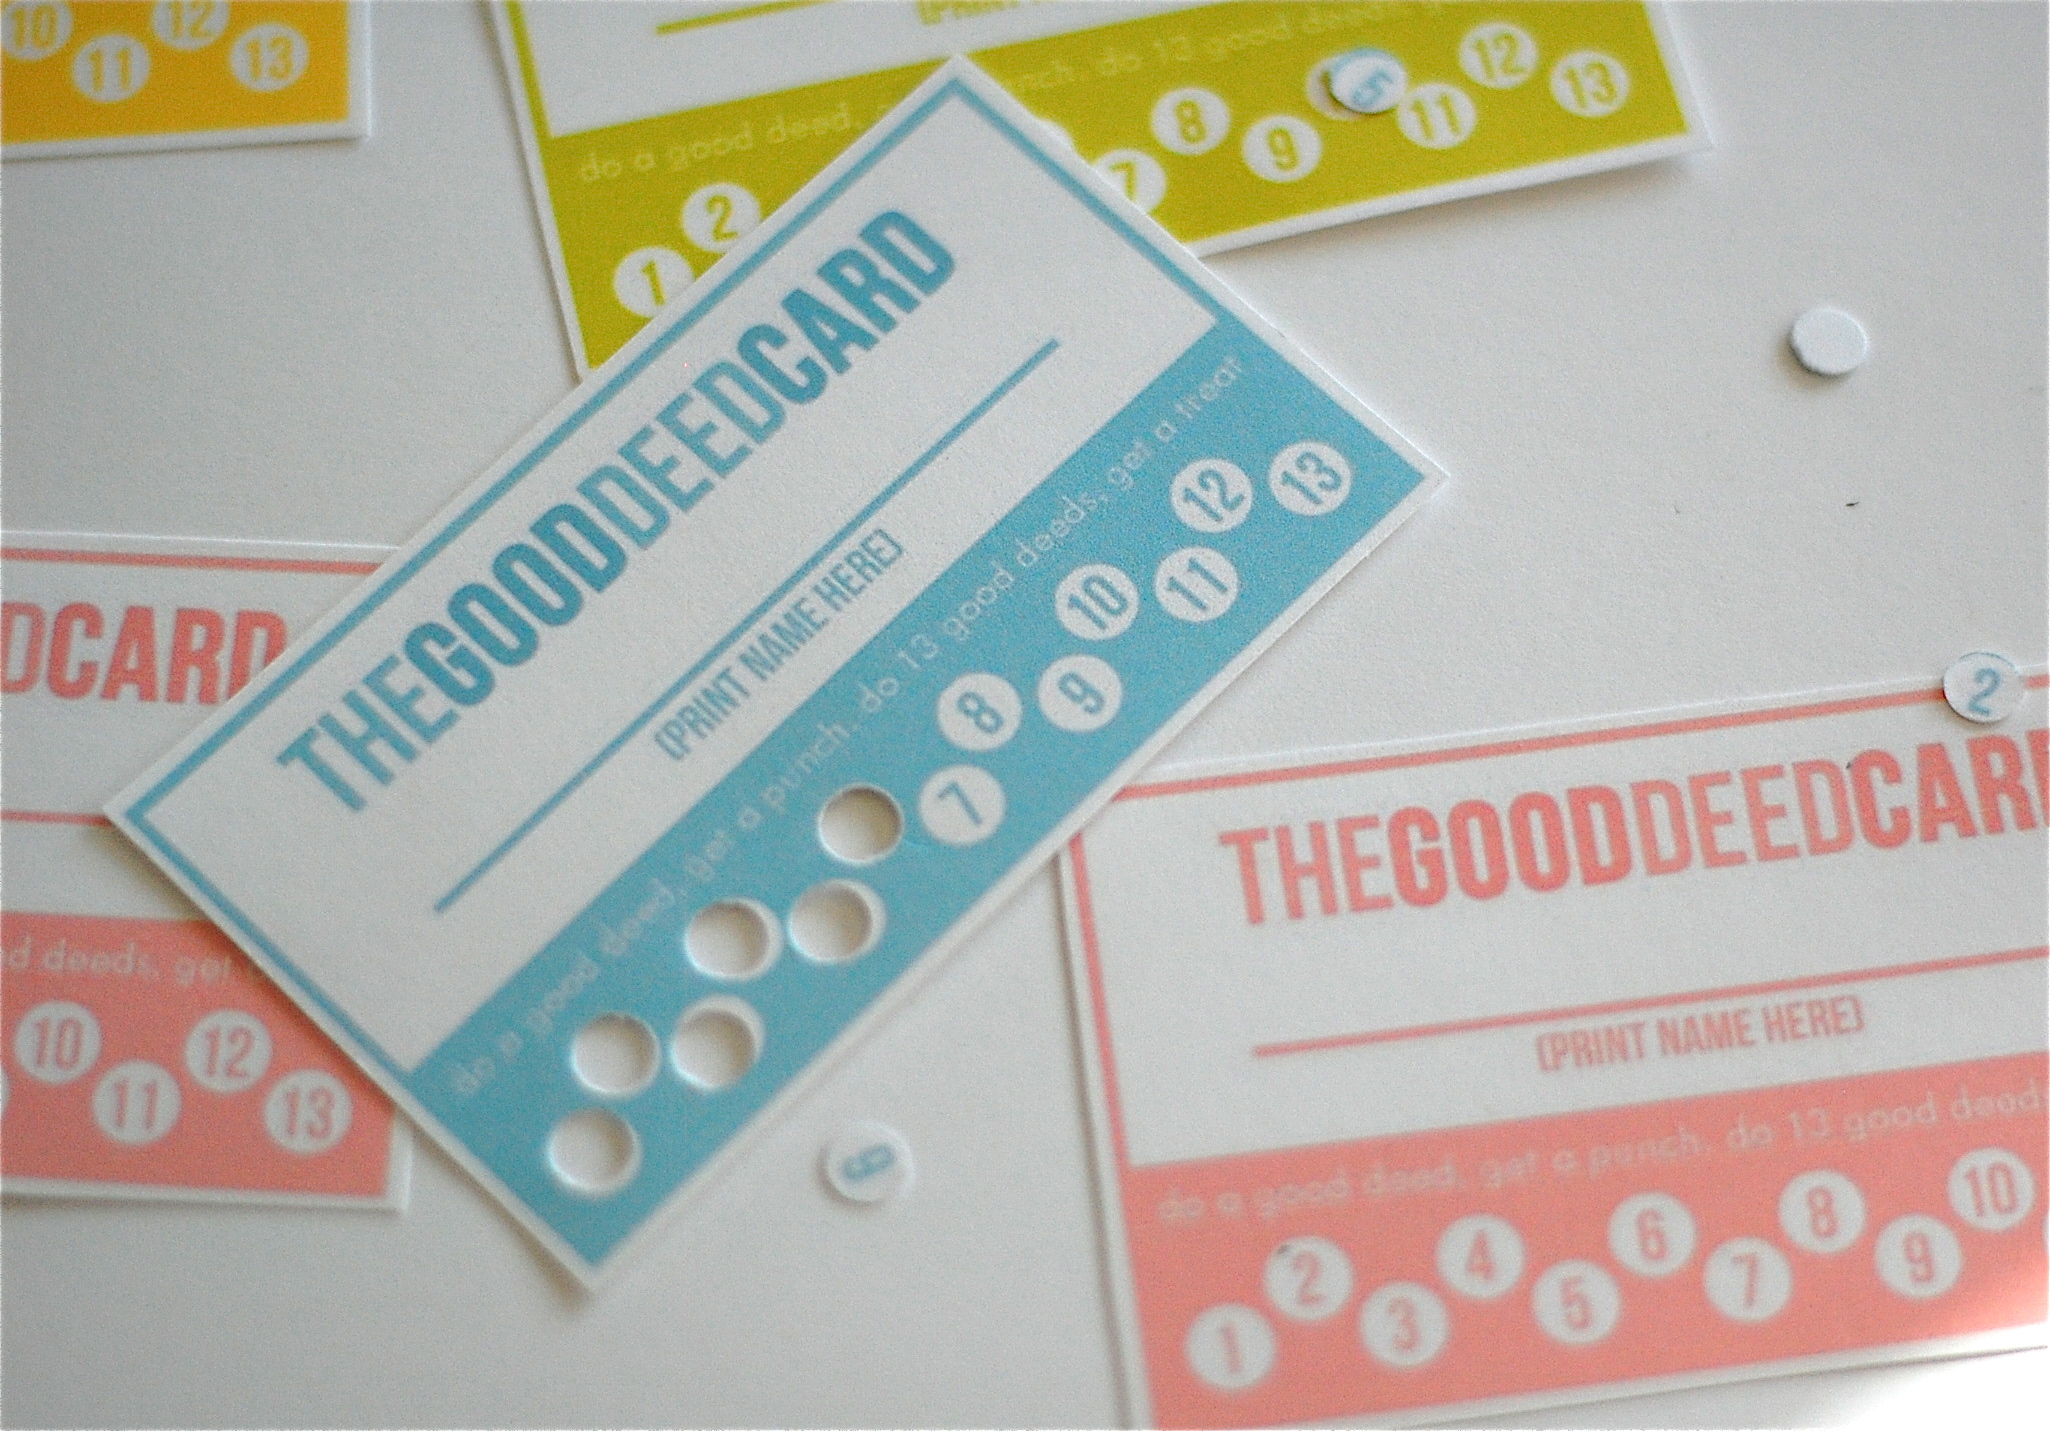 positive parenting: getting your little ones to listen (specifically those 4 year olds!!) with the good deed card!